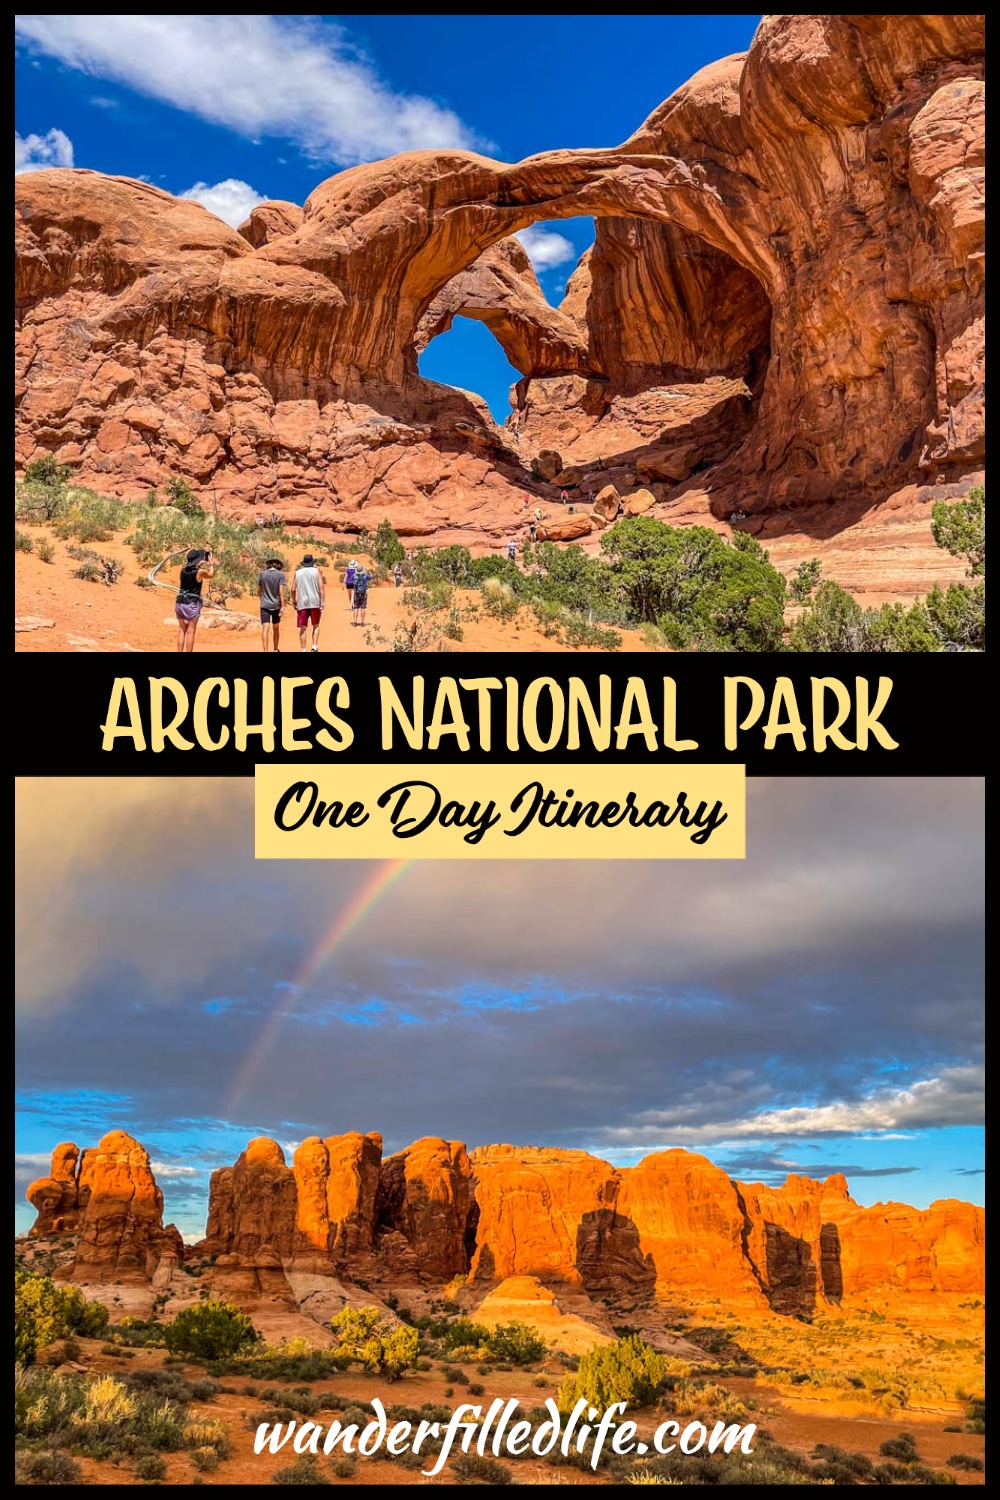 Arches National Park in Moab is one of the most popular national parks in the US for good reason... the truly awe-inspiring rock formations.